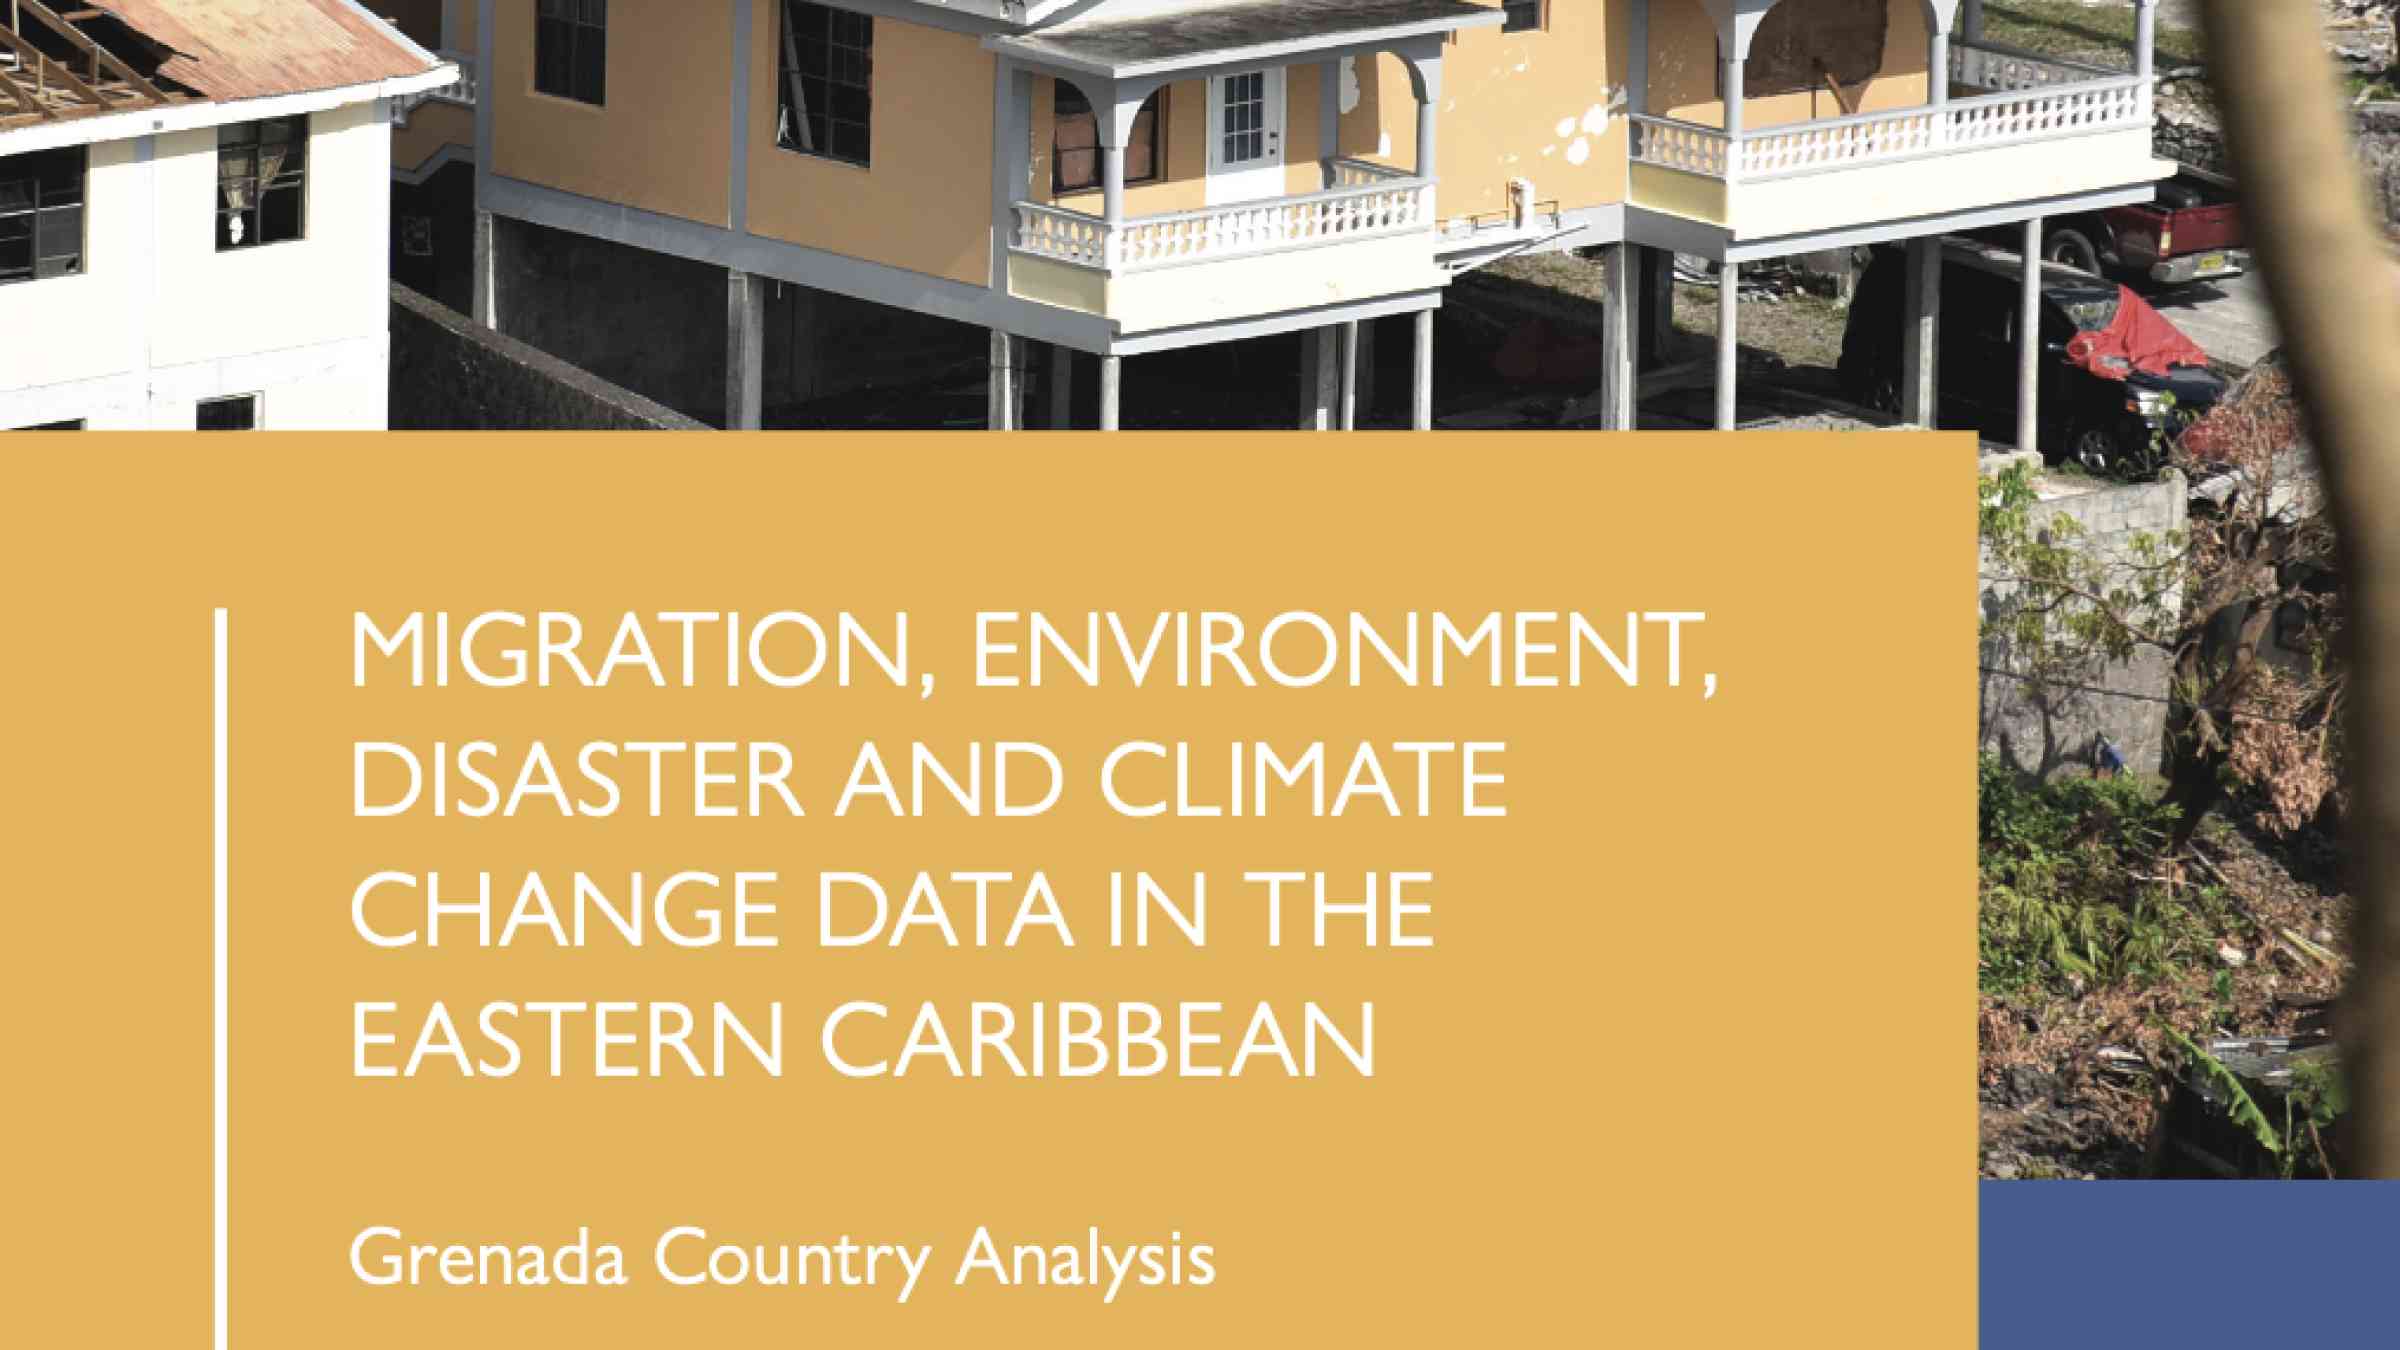 This screenshot shows the coverage of the publication entilited "Migration, Environment, Disaster and Climate Change Data in the Eastern Caribbean-Grenada Country Analysis"